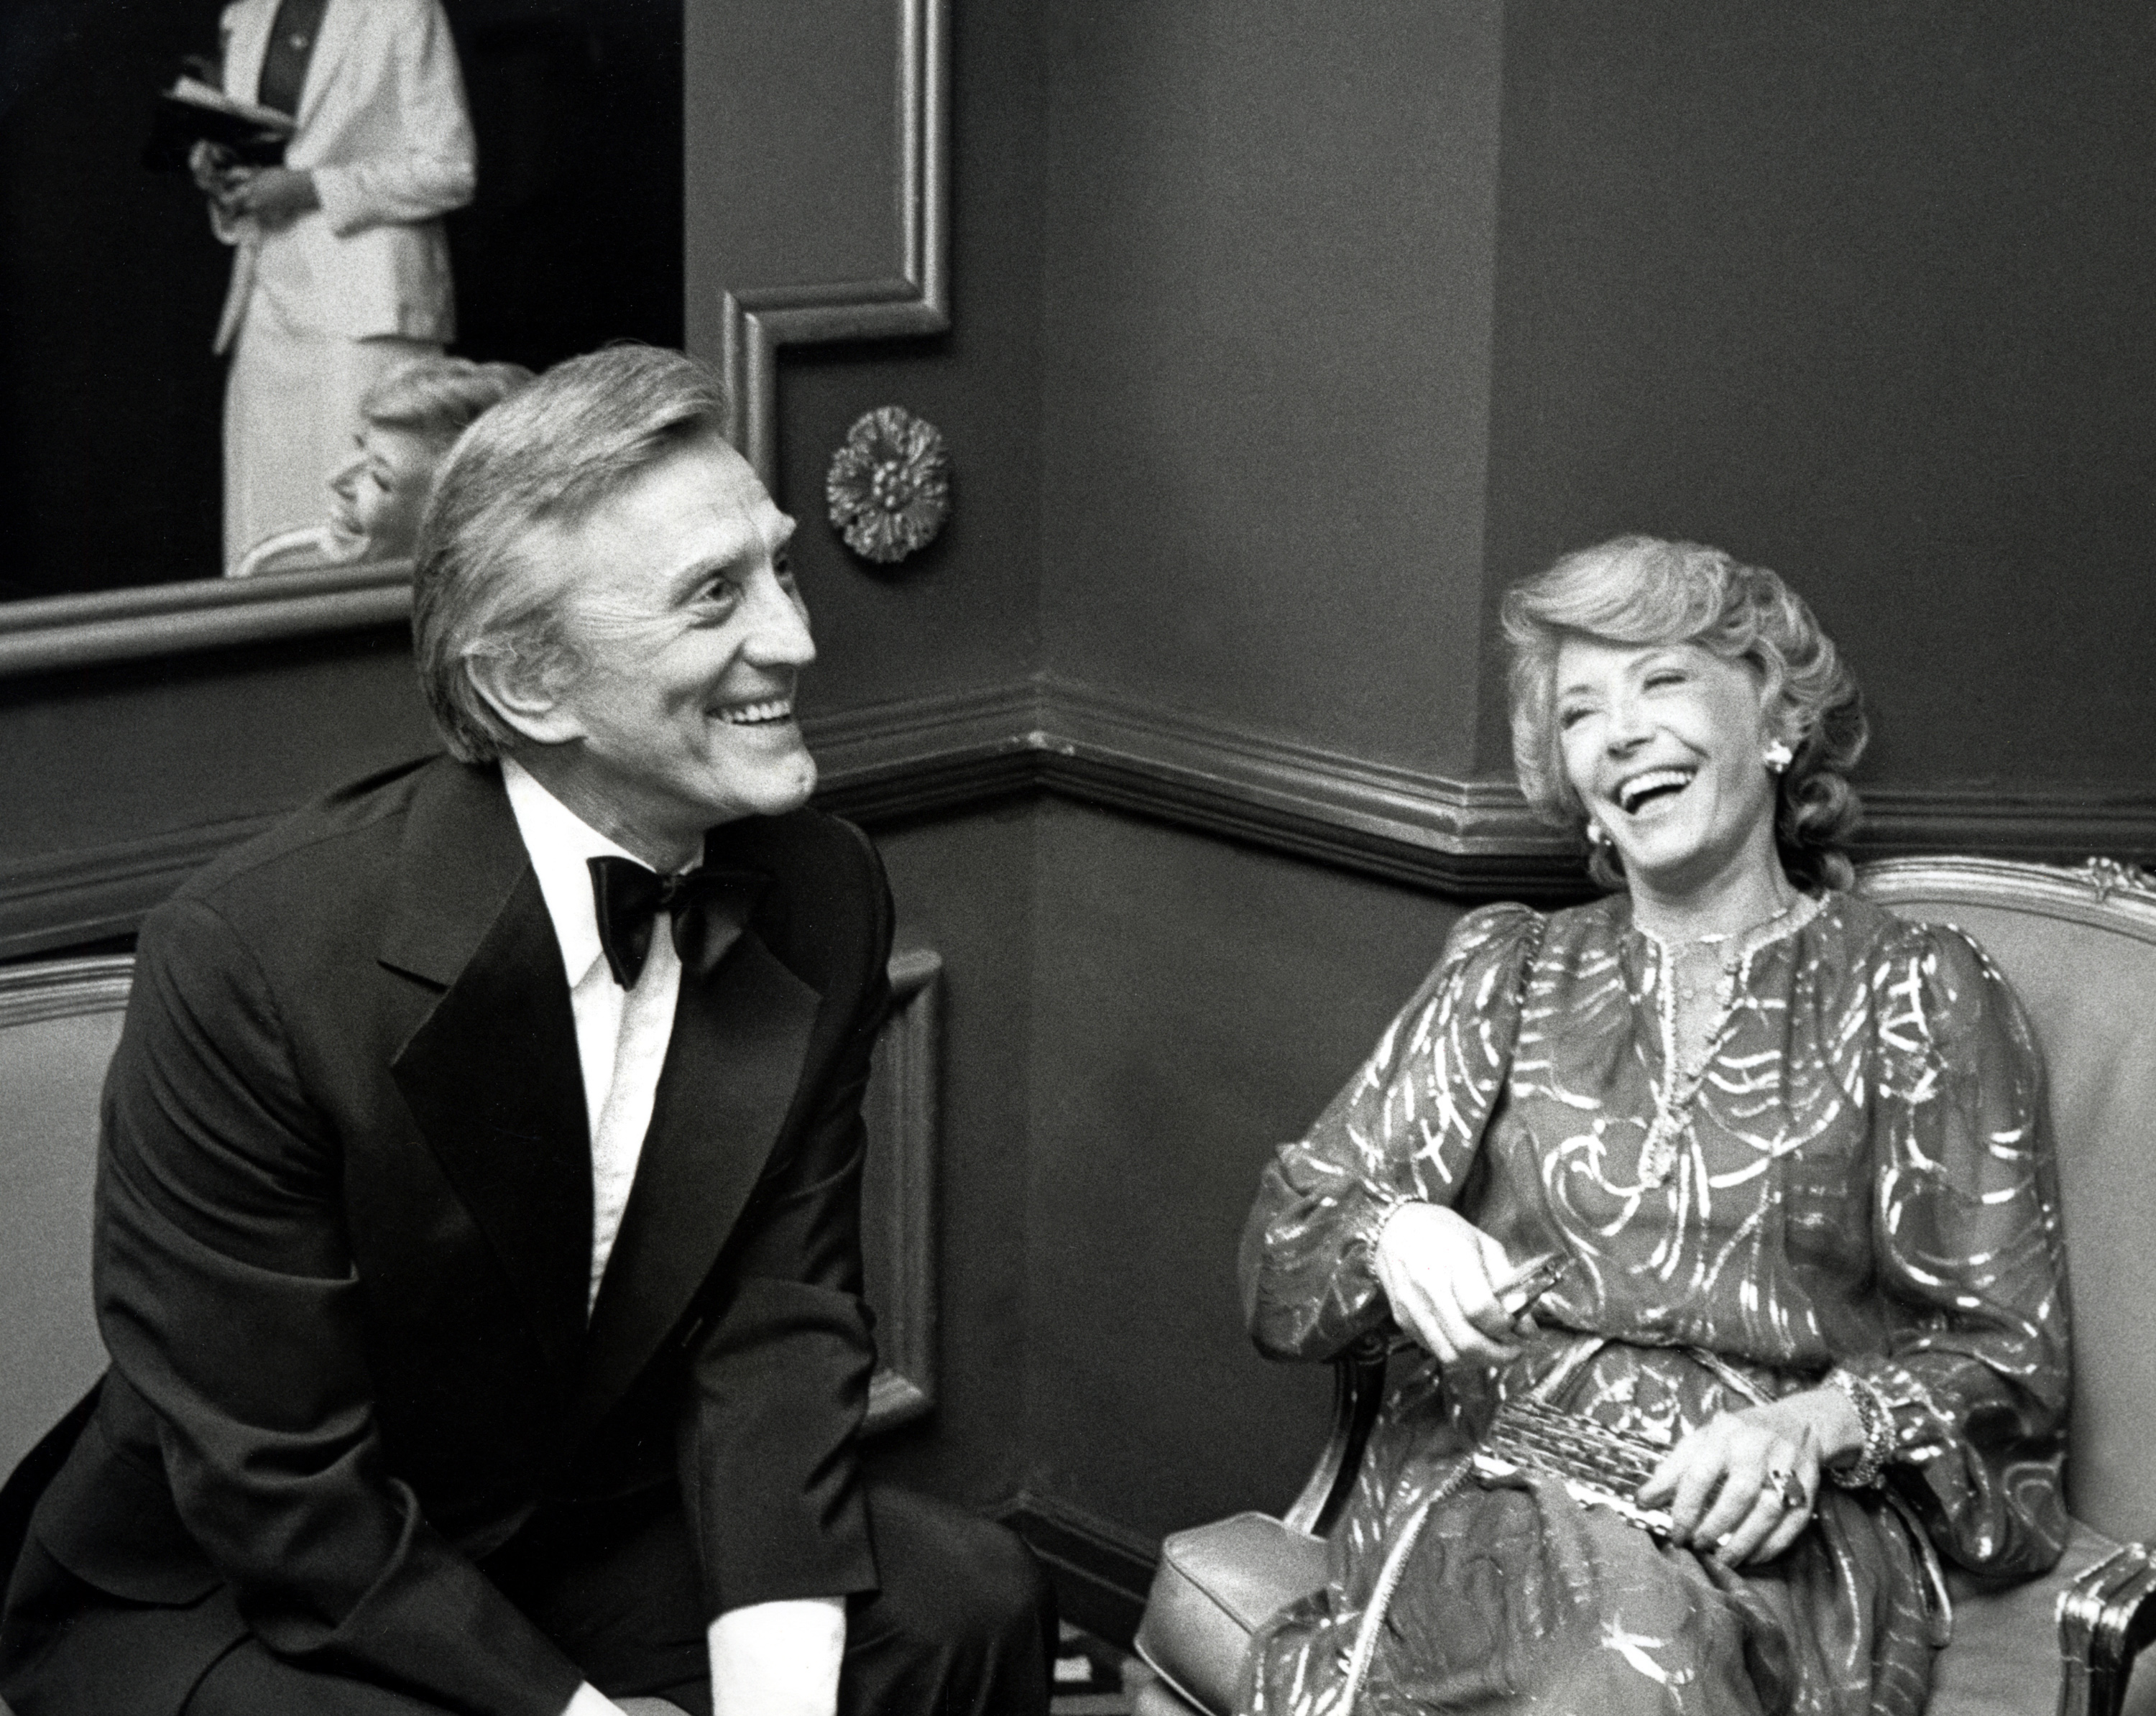 Kirk Douglas and wife Anne Douglas during Friars' Club Salute to Johnny Carson as "Entertainer of the Year" 1979 at The Waldorf-Astoria Hotel in New York, New York, United States. | Source: Getty Images